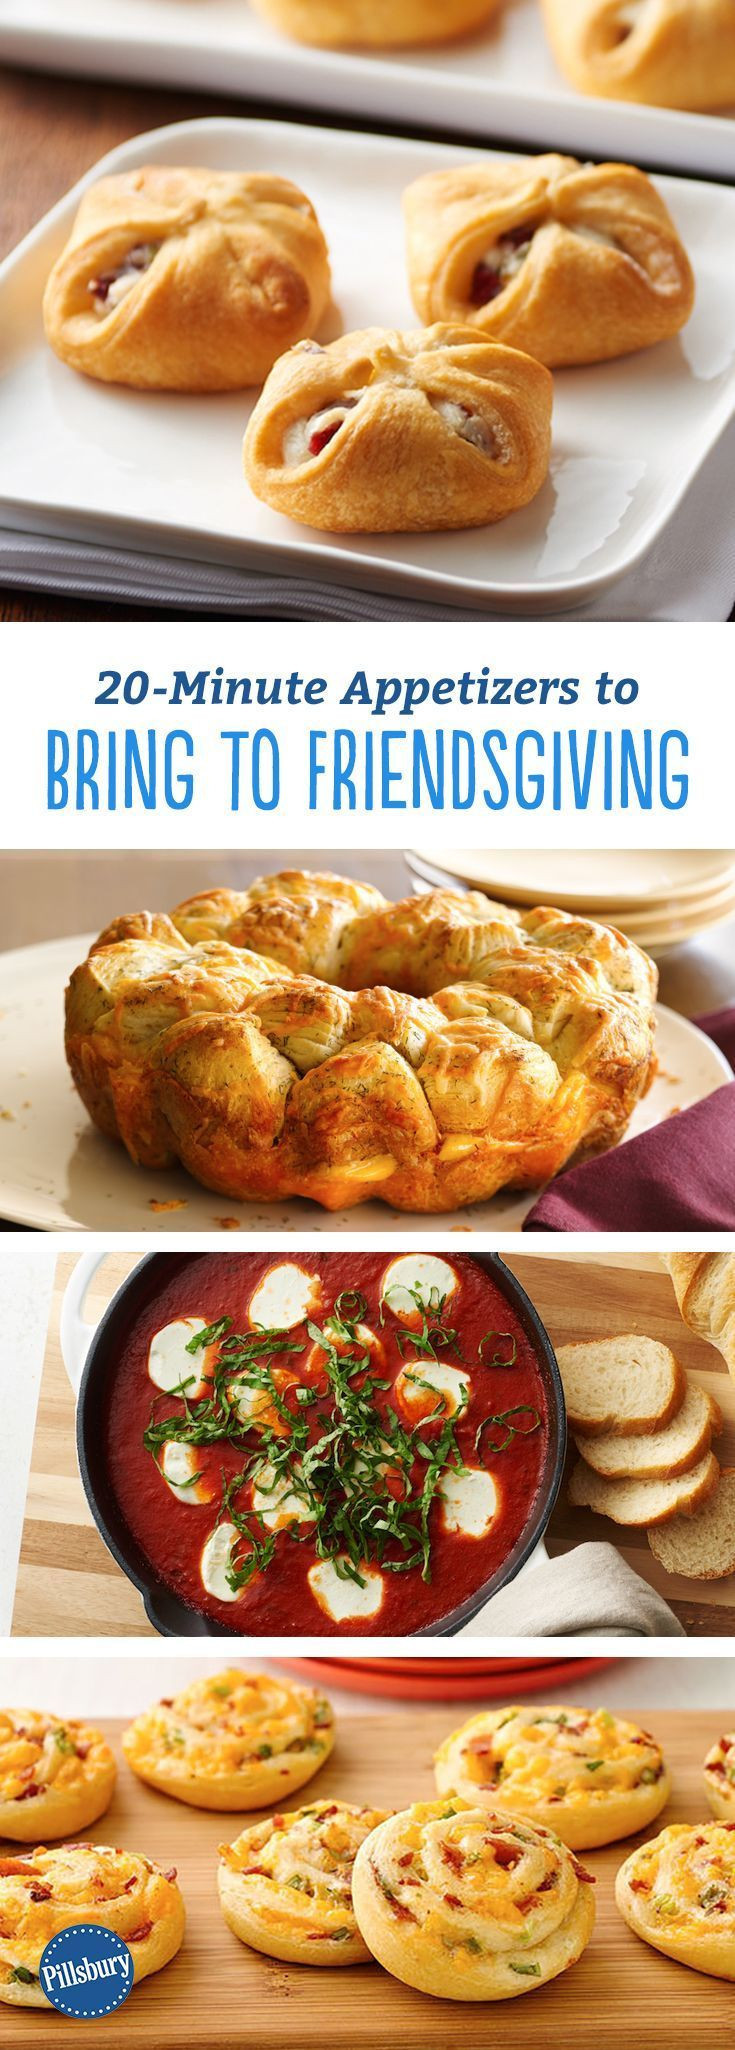 Thanksgiving 2019 Appetizers
 30 Best Thanksgiving 2019 Appetizers Most Popular Ideas